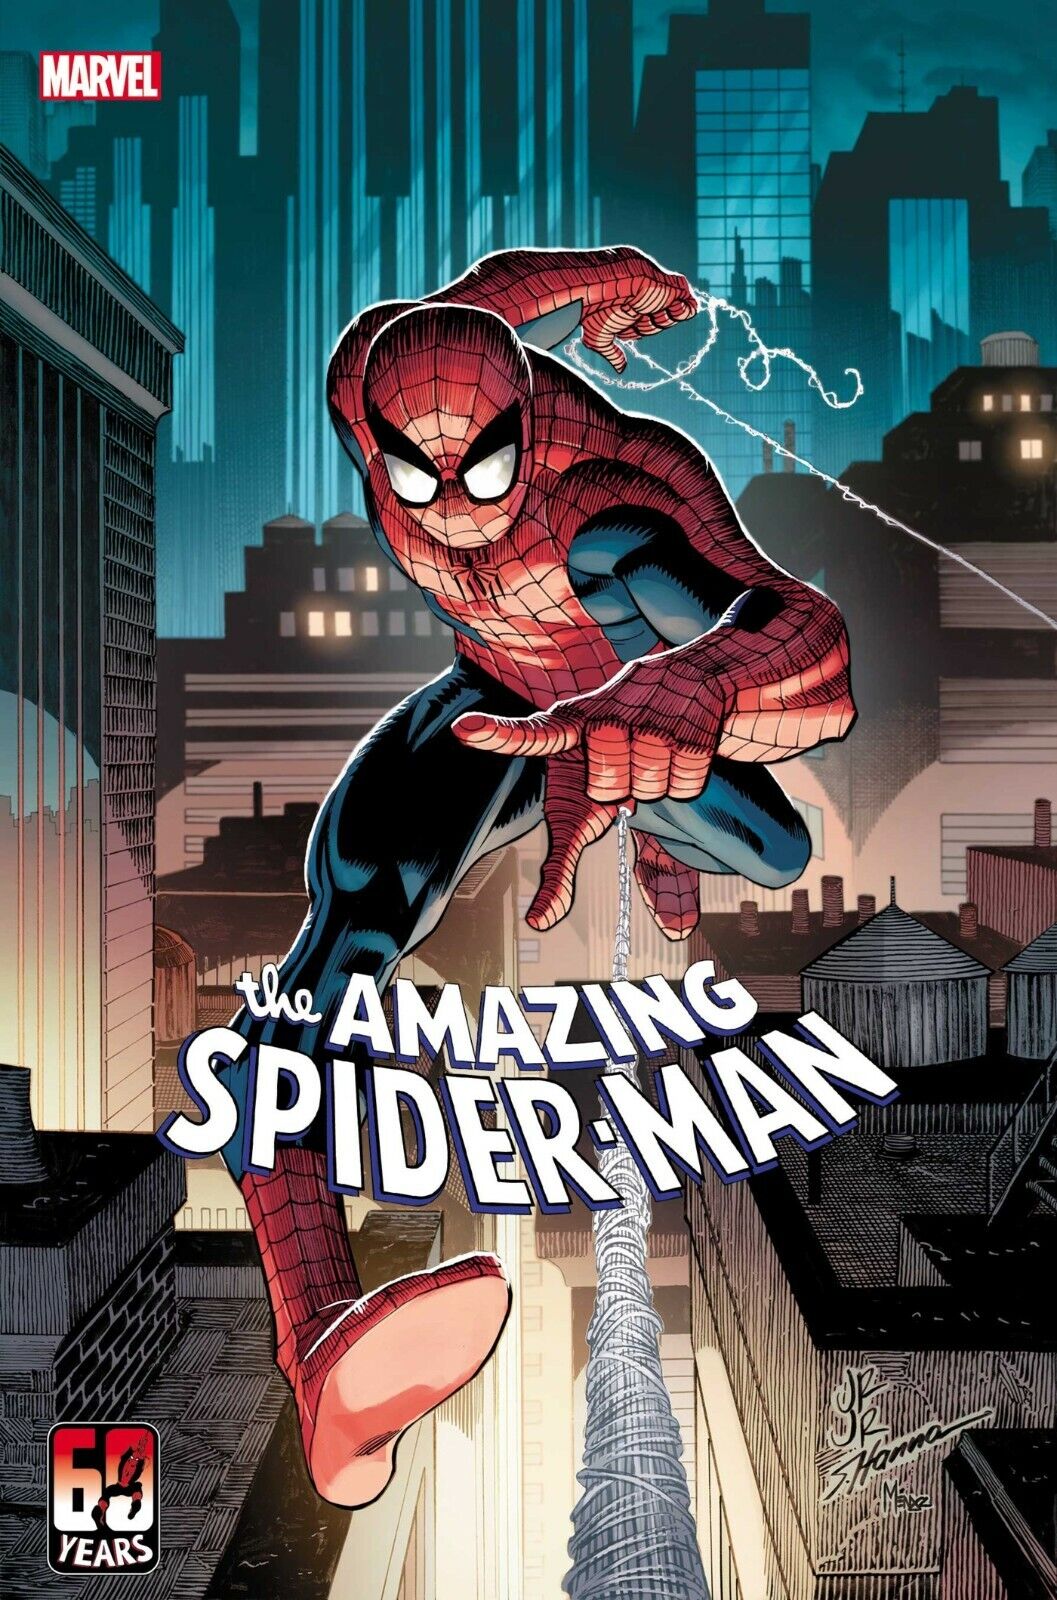 The Amazing Spider-Man #1 Released 4/27 (Variant covers available) MARVEL Comics